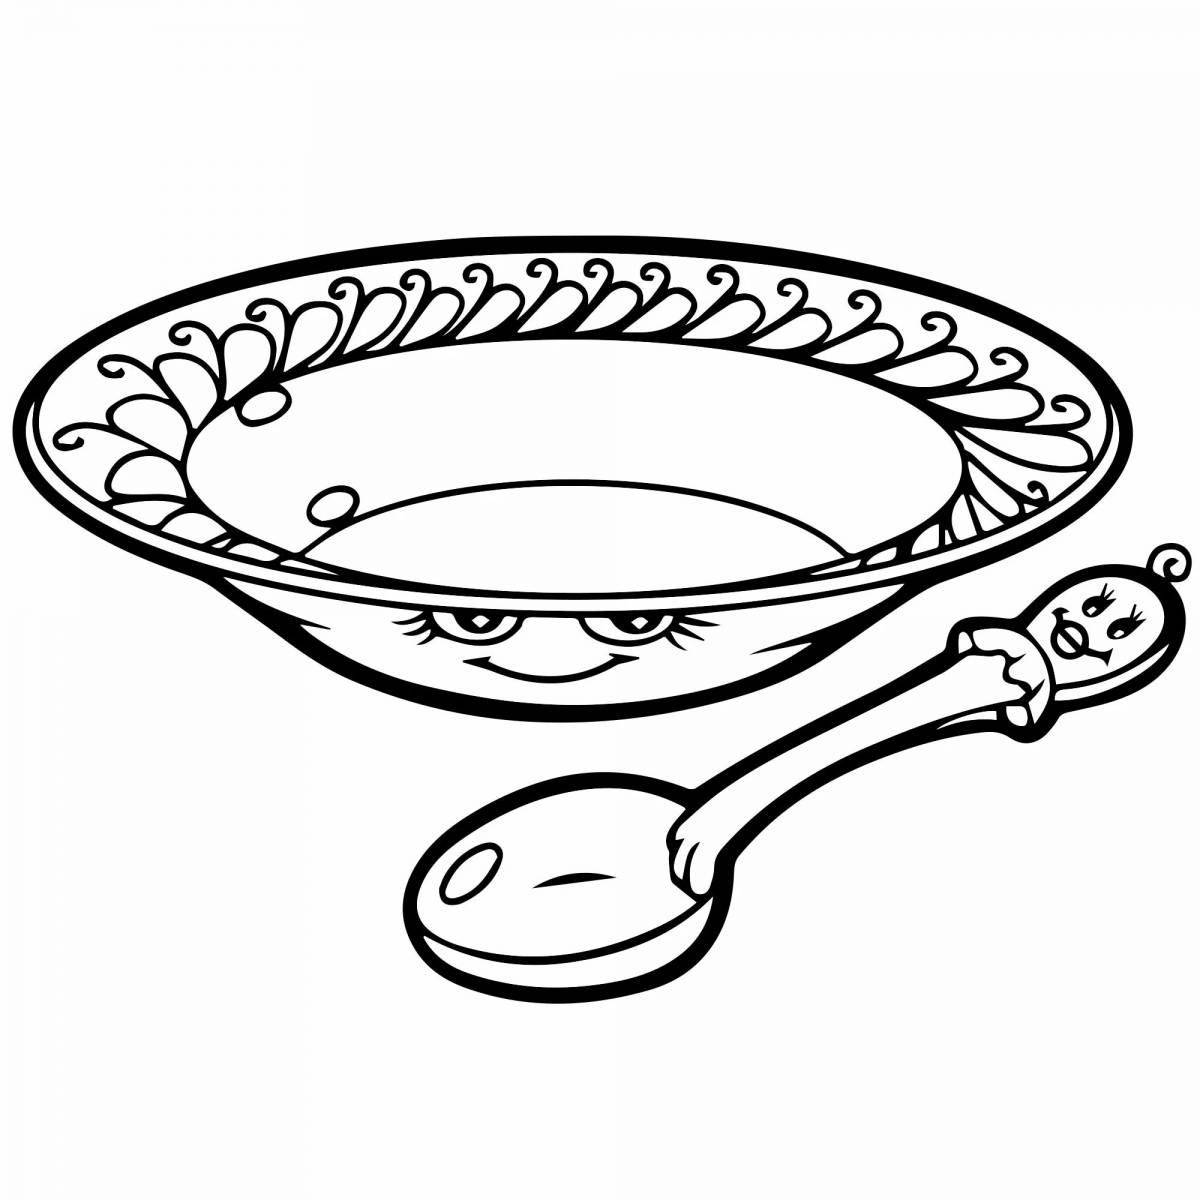 Coloring page of colorful pre-ks dishes